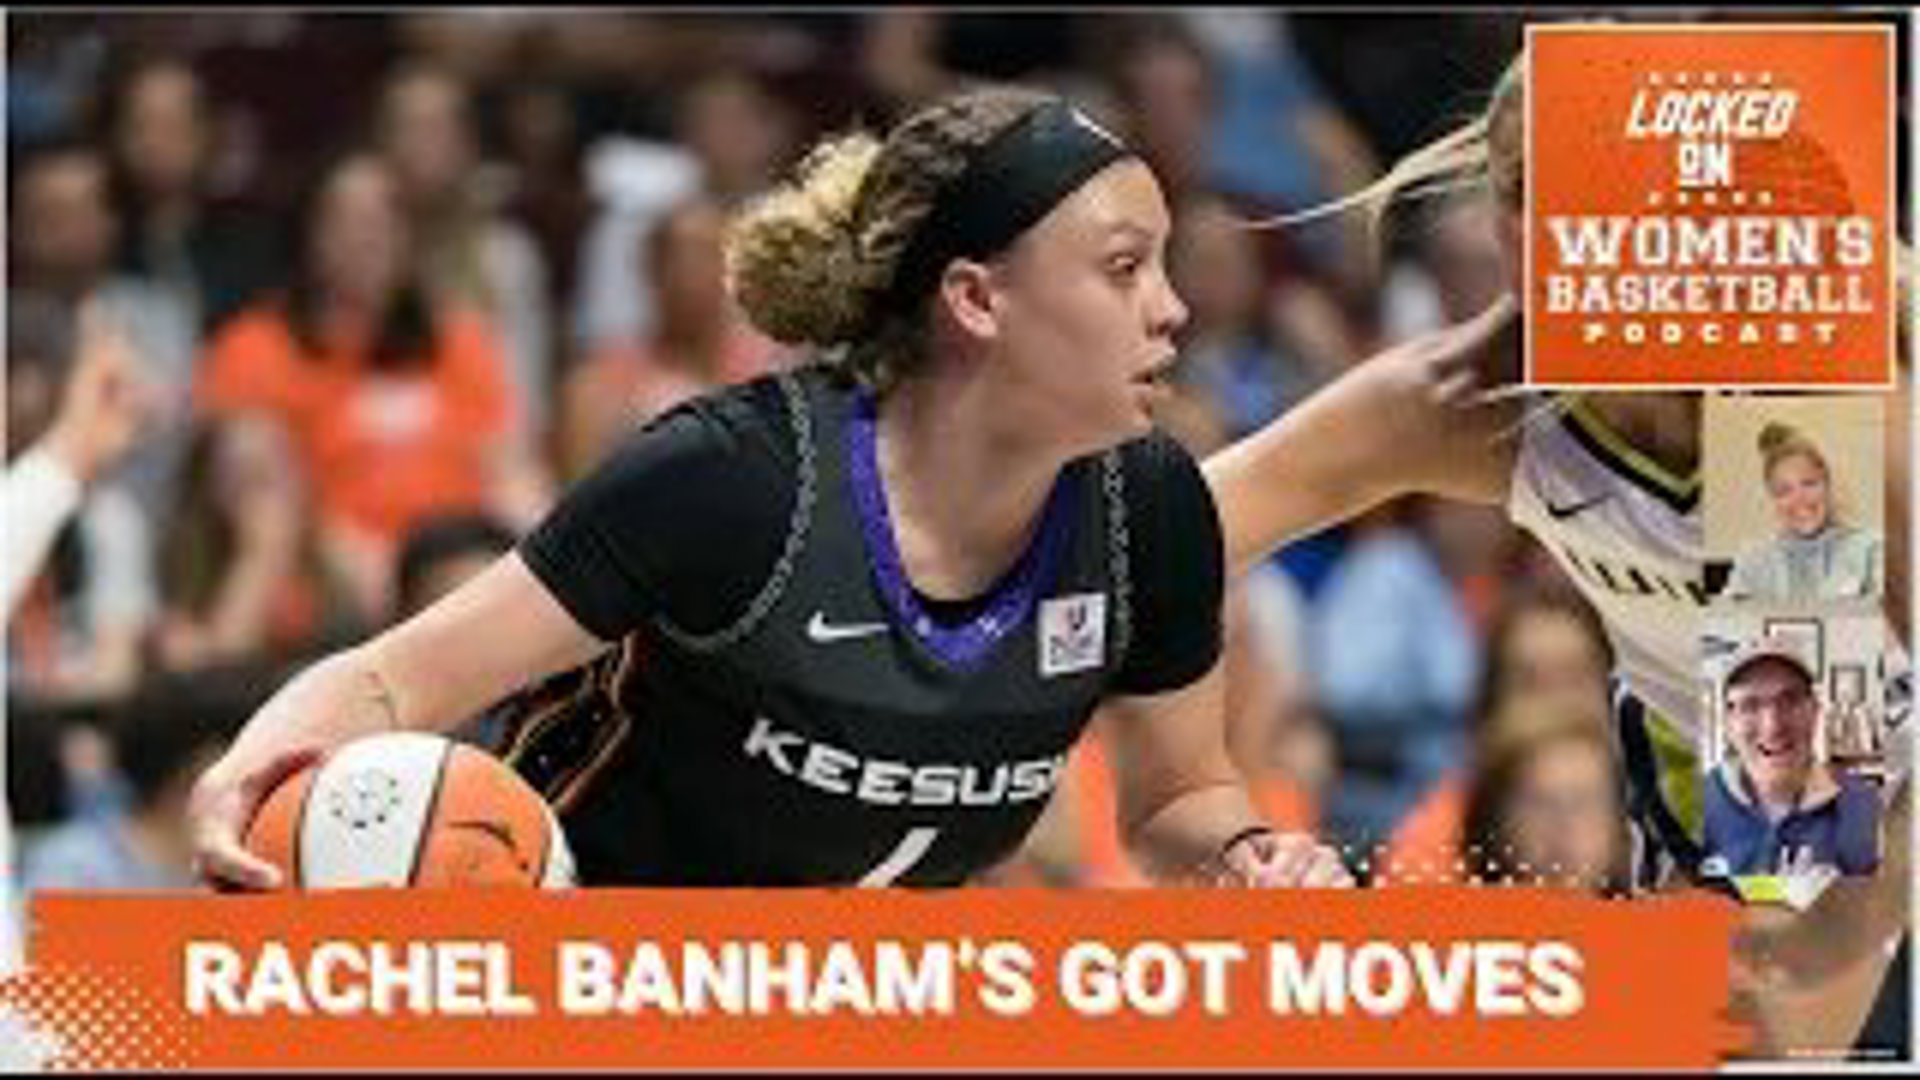 For Rachel Banham and the Connecticut Sun, this past offseason's agreement has already paid dividends.